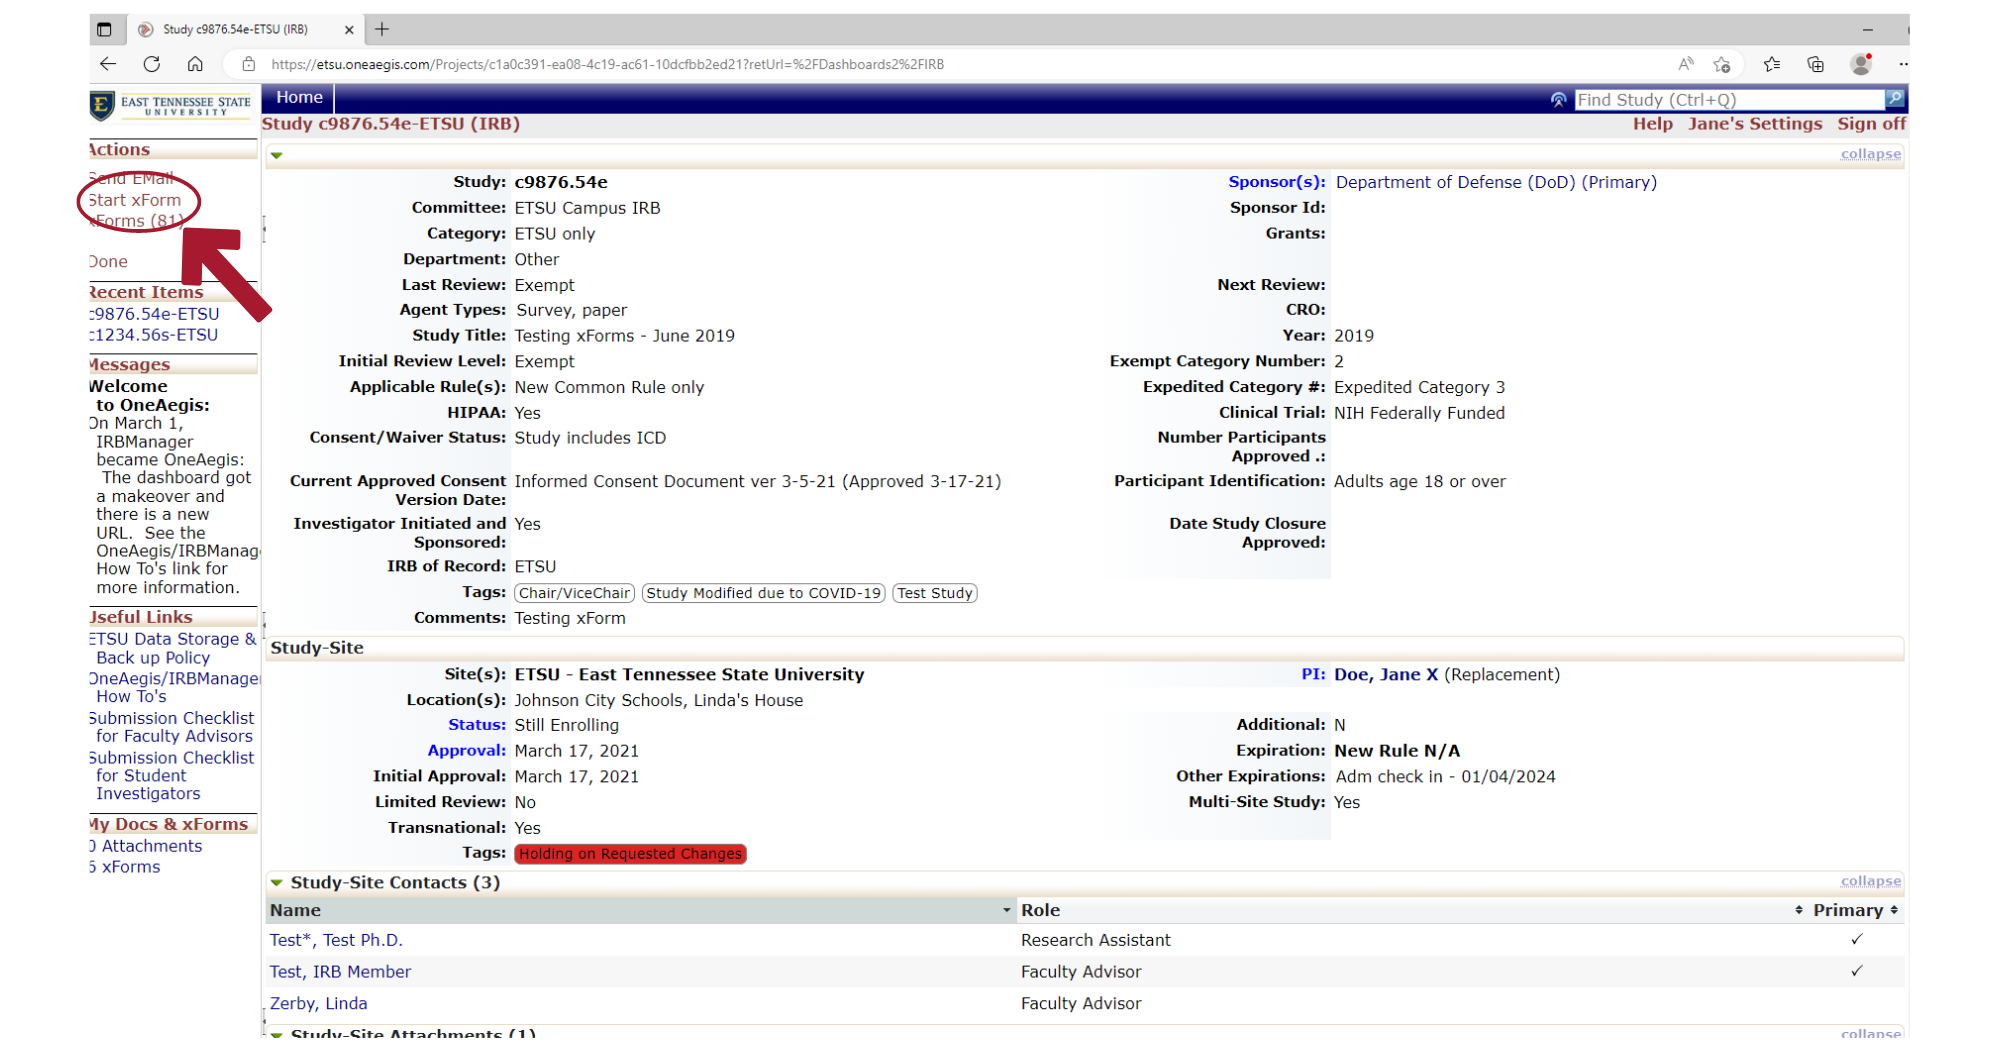 Screenshot showing "Start xForm" link in the top left corner of a OneAegis study page.